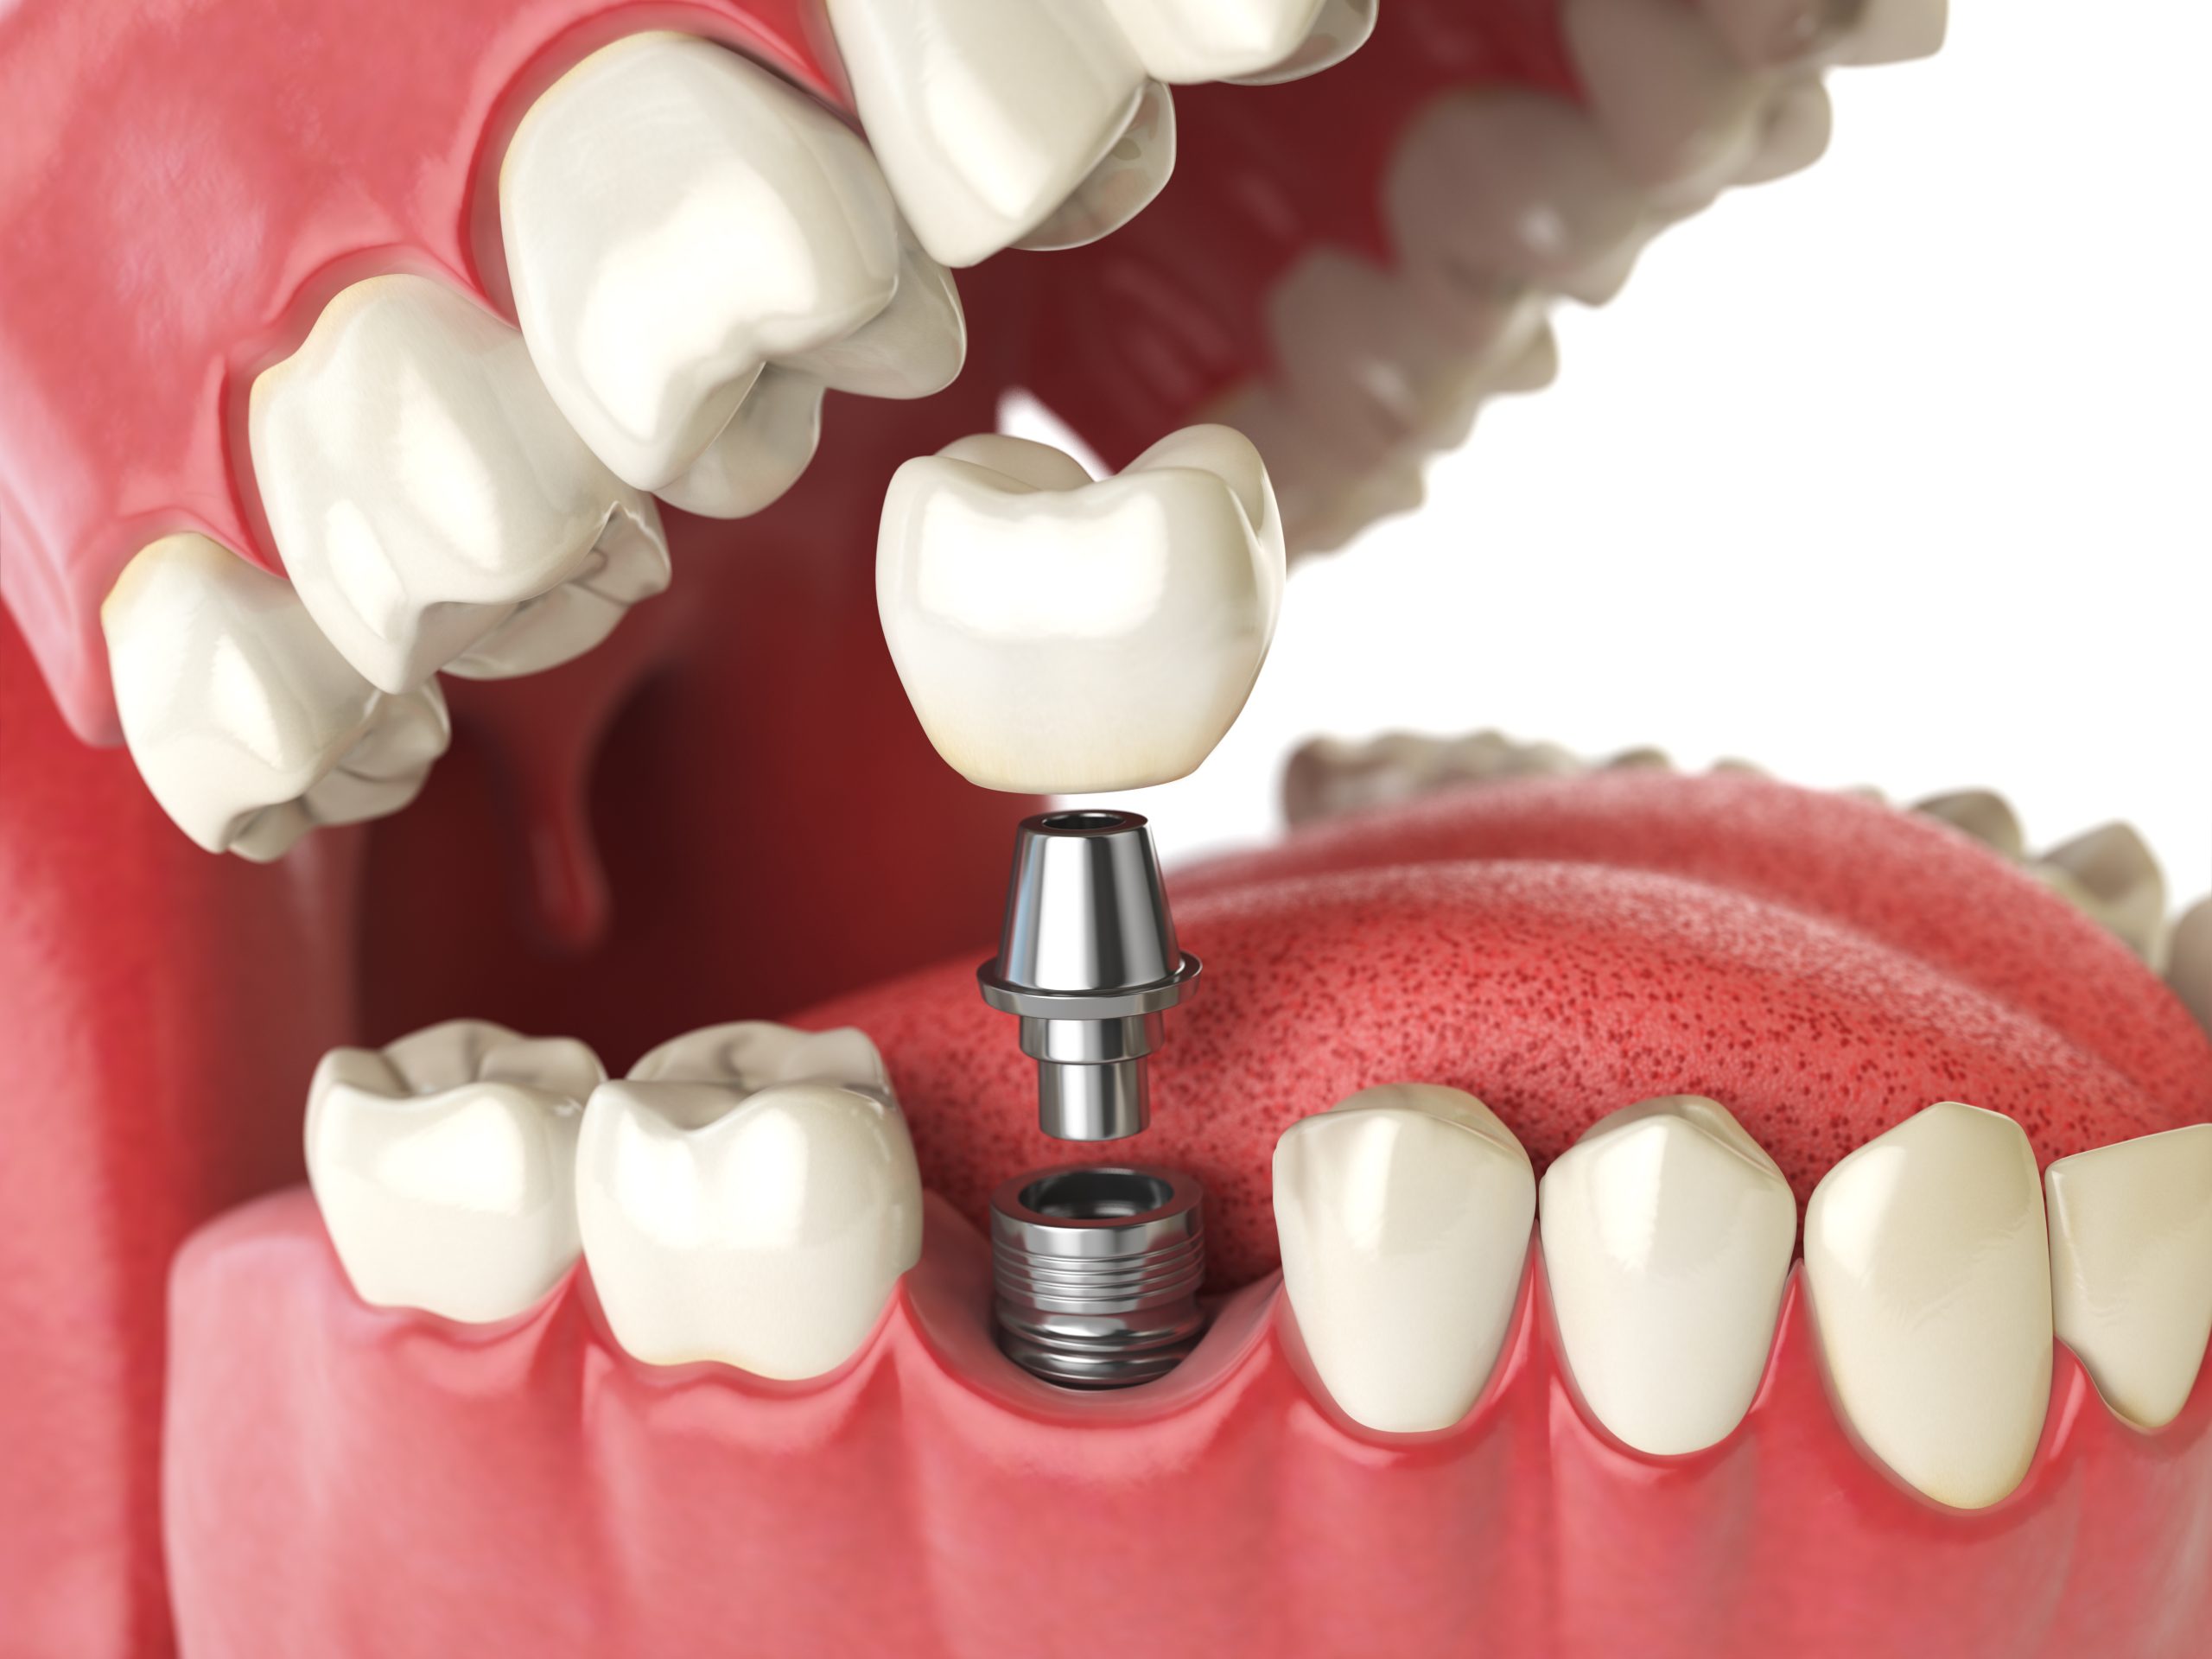 Are Dental Implants For Real?